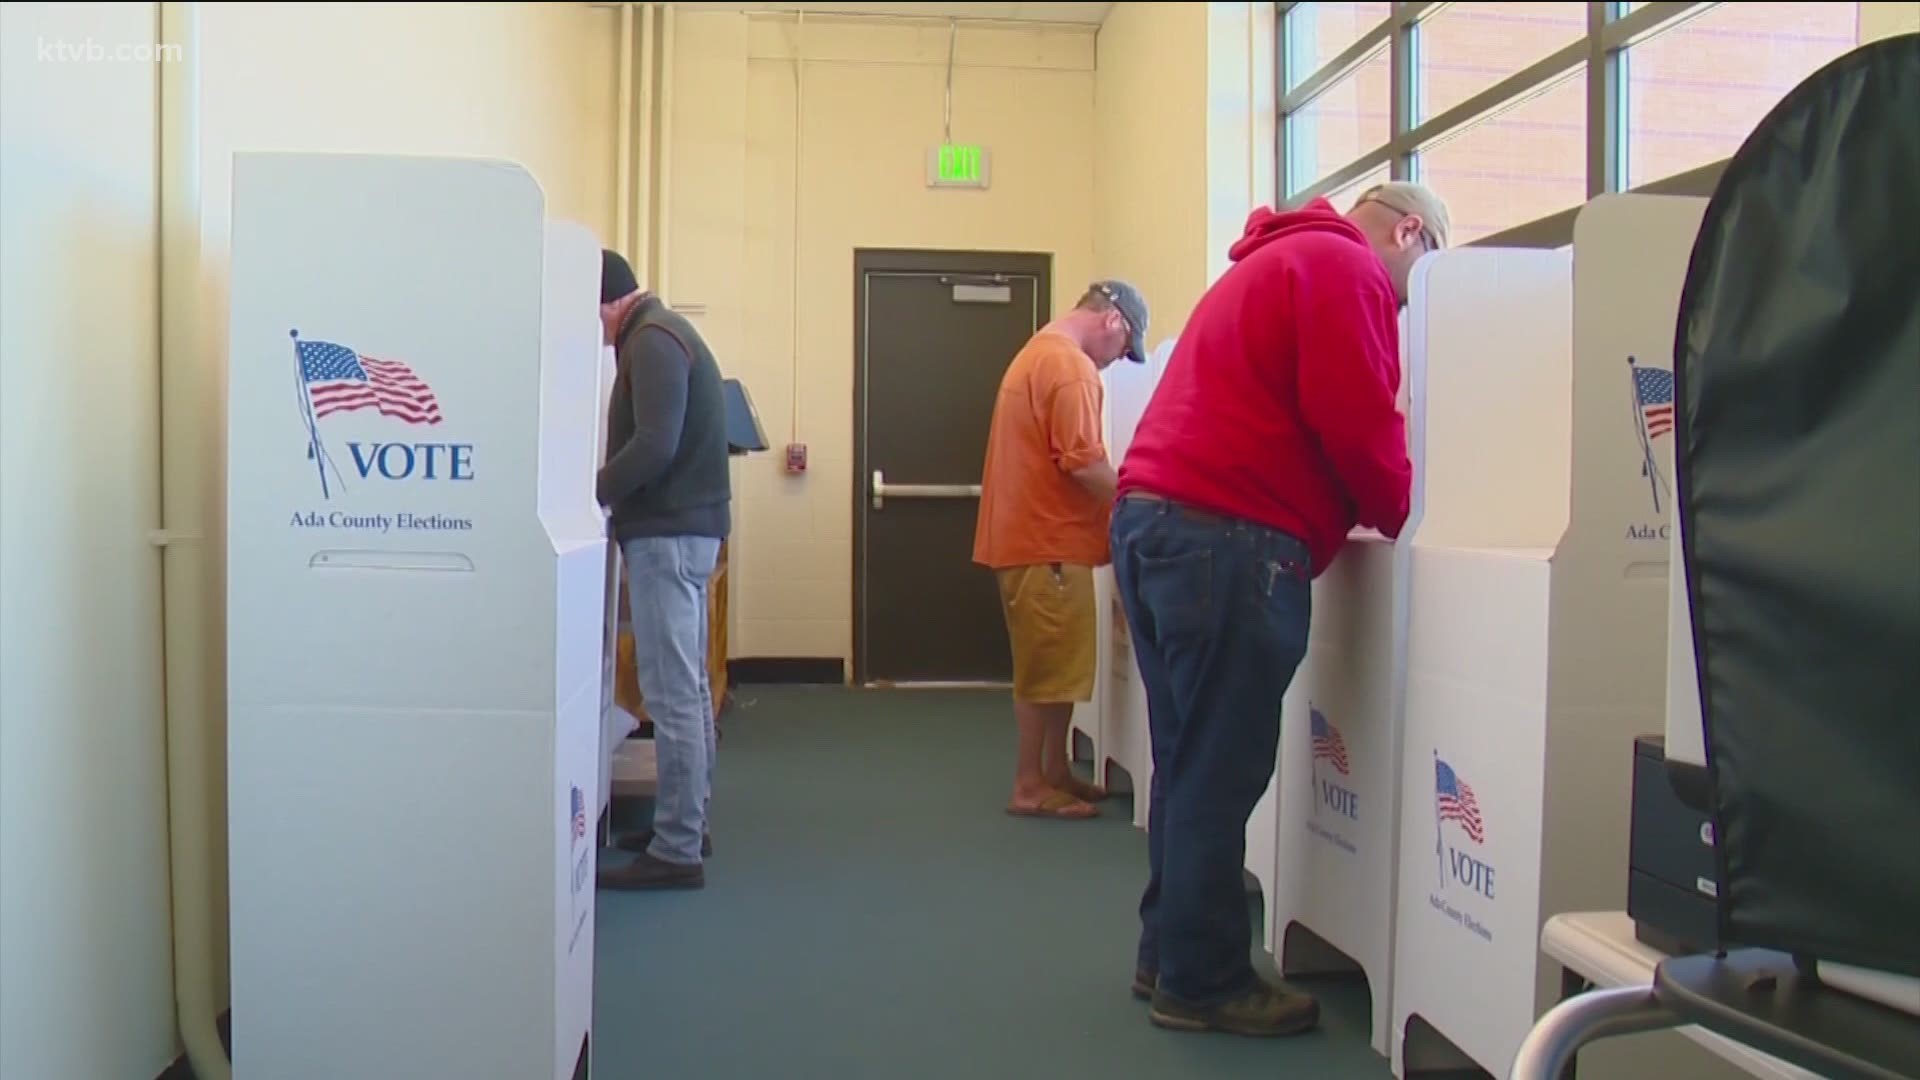 Idaho does not allow people to show up in groups to observe the election processes.